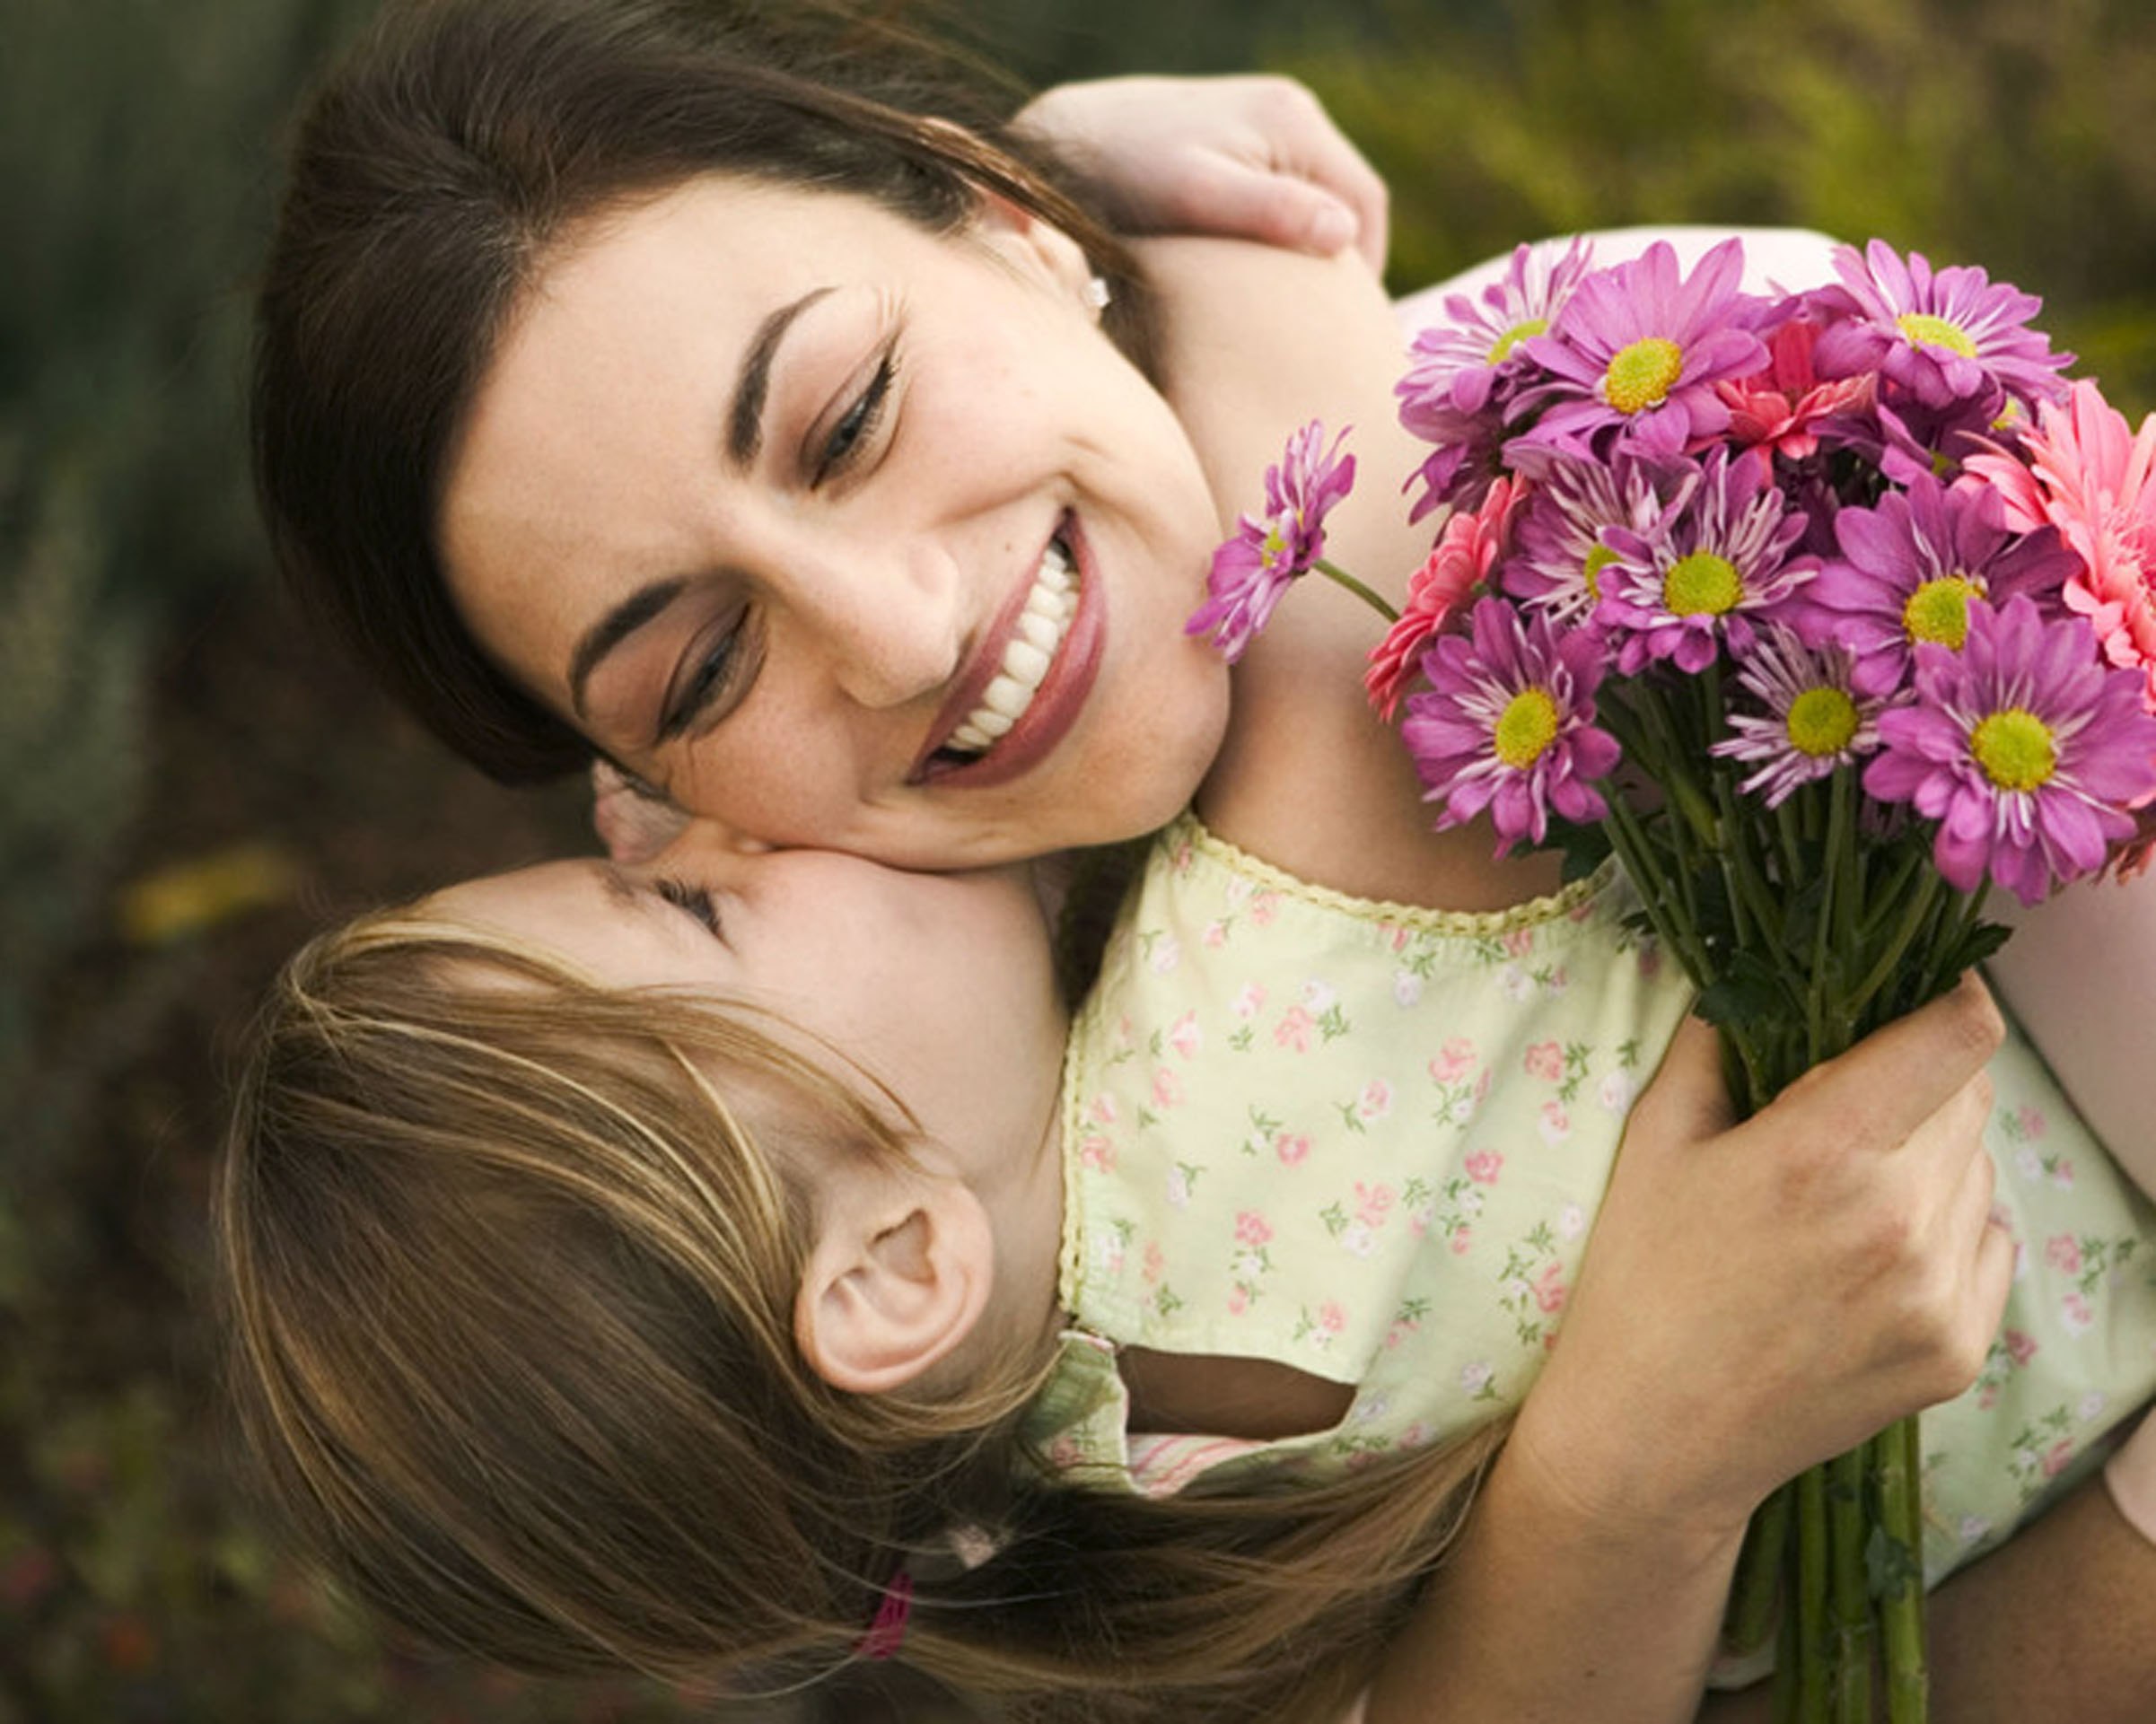 Wish Your Mother A Very Happy Mother’s Day With Flowers!!